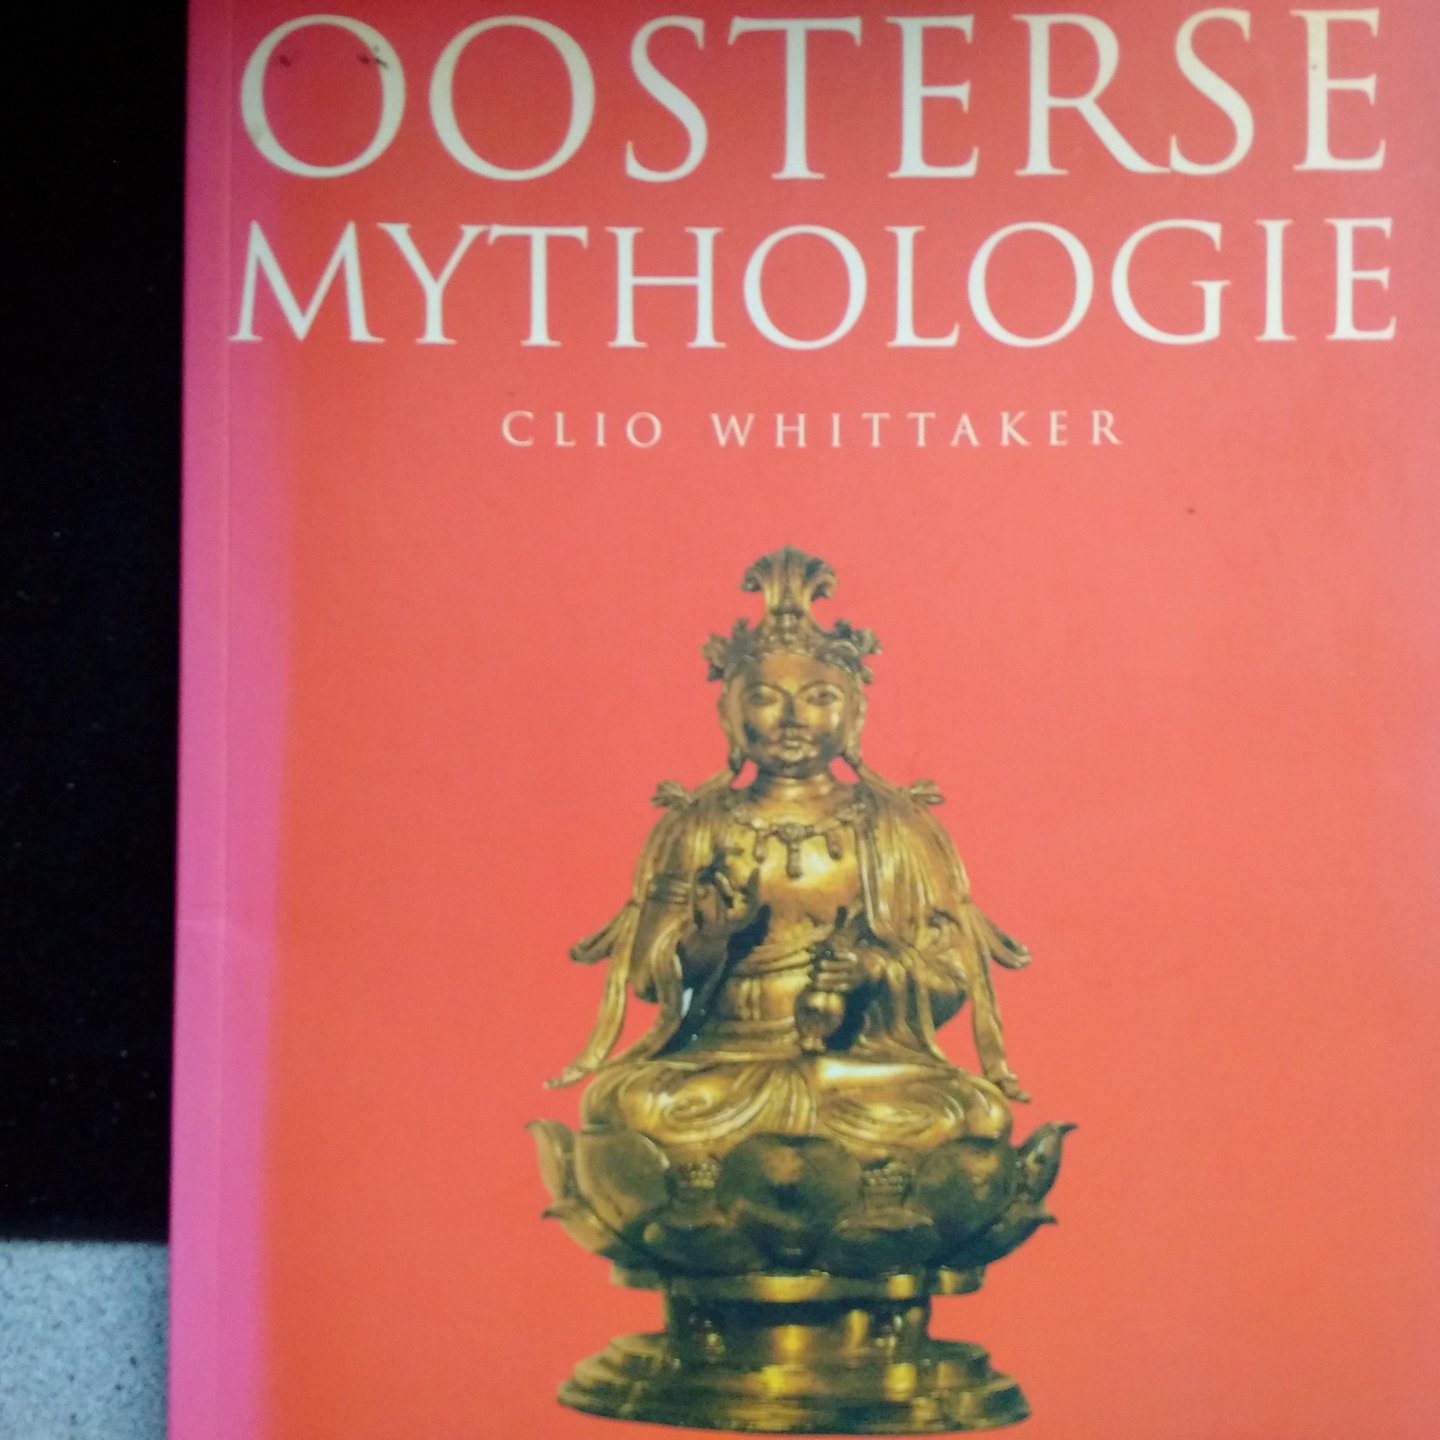 Whittaker, Clio - Oosterse mythologie